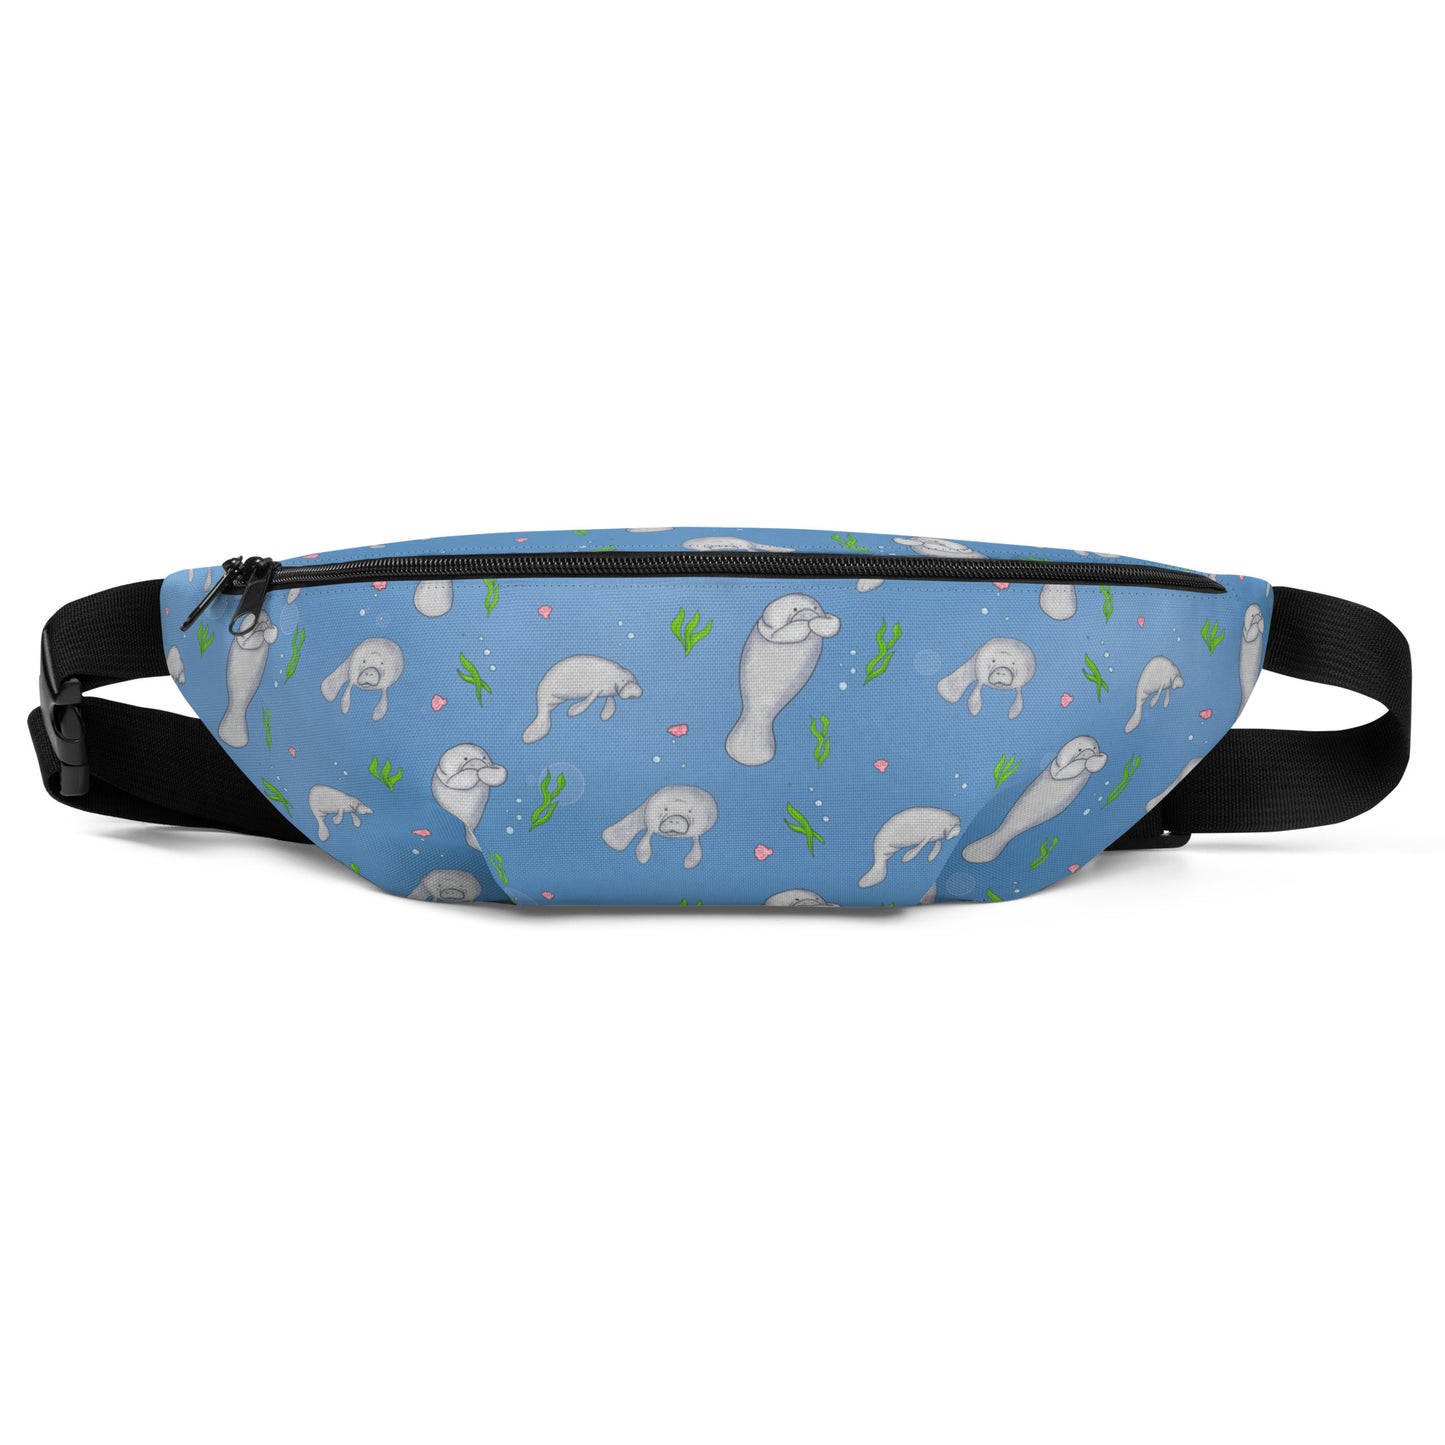 Cute manatee patterned belt bag with adjustable straps, zippered pouch, and small inner pocket. Front view.